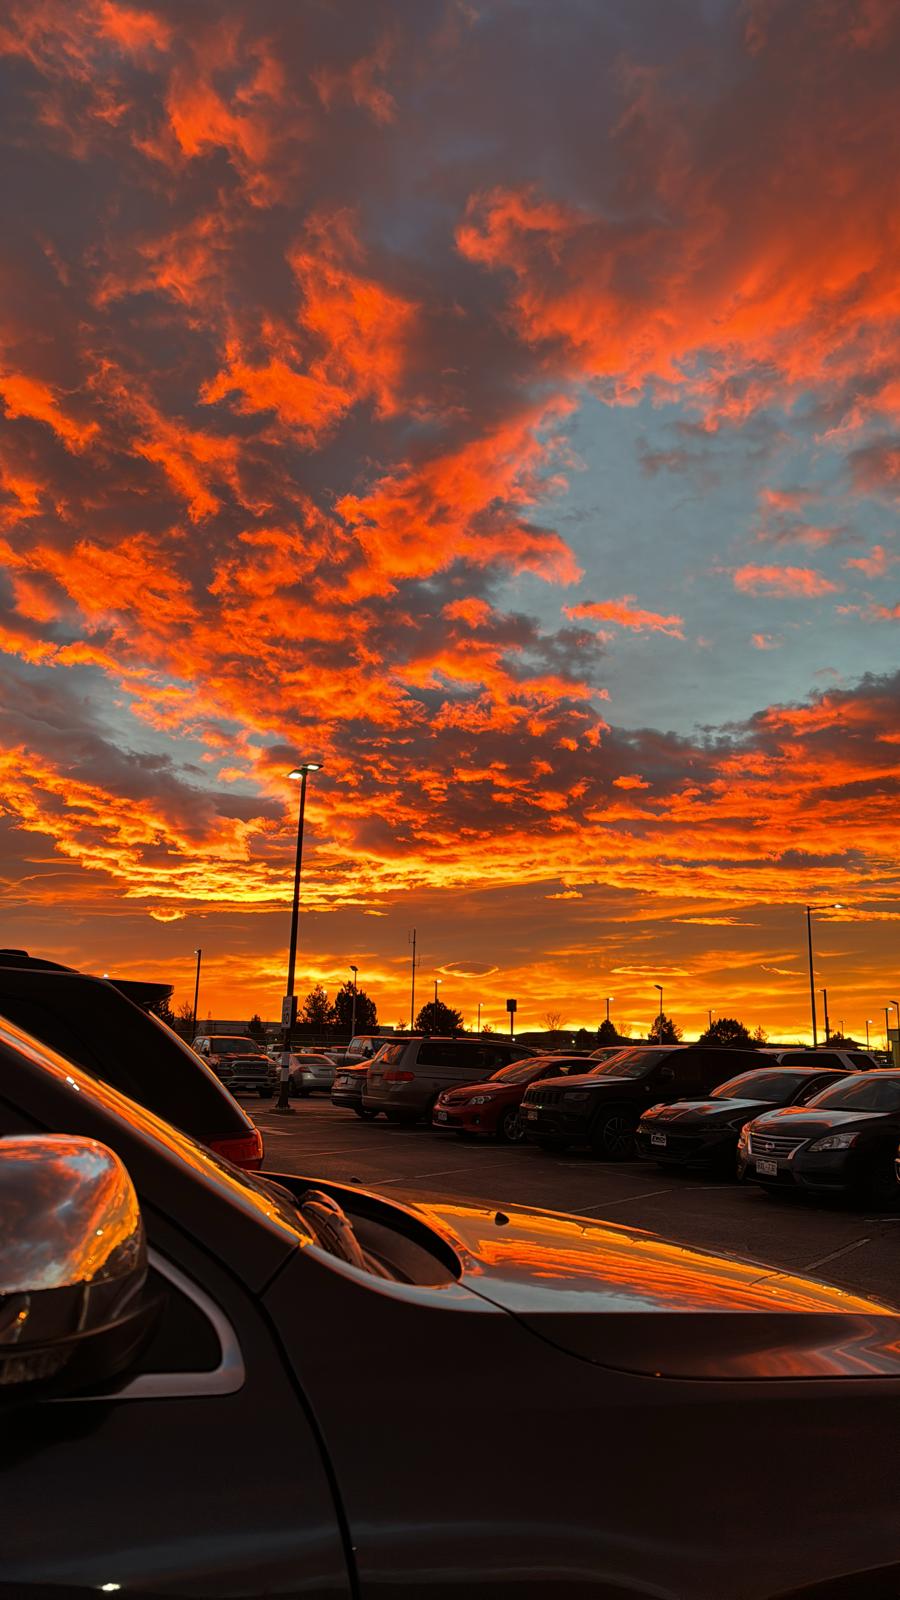 A red and orange sunset over a parking lot - Sunrise